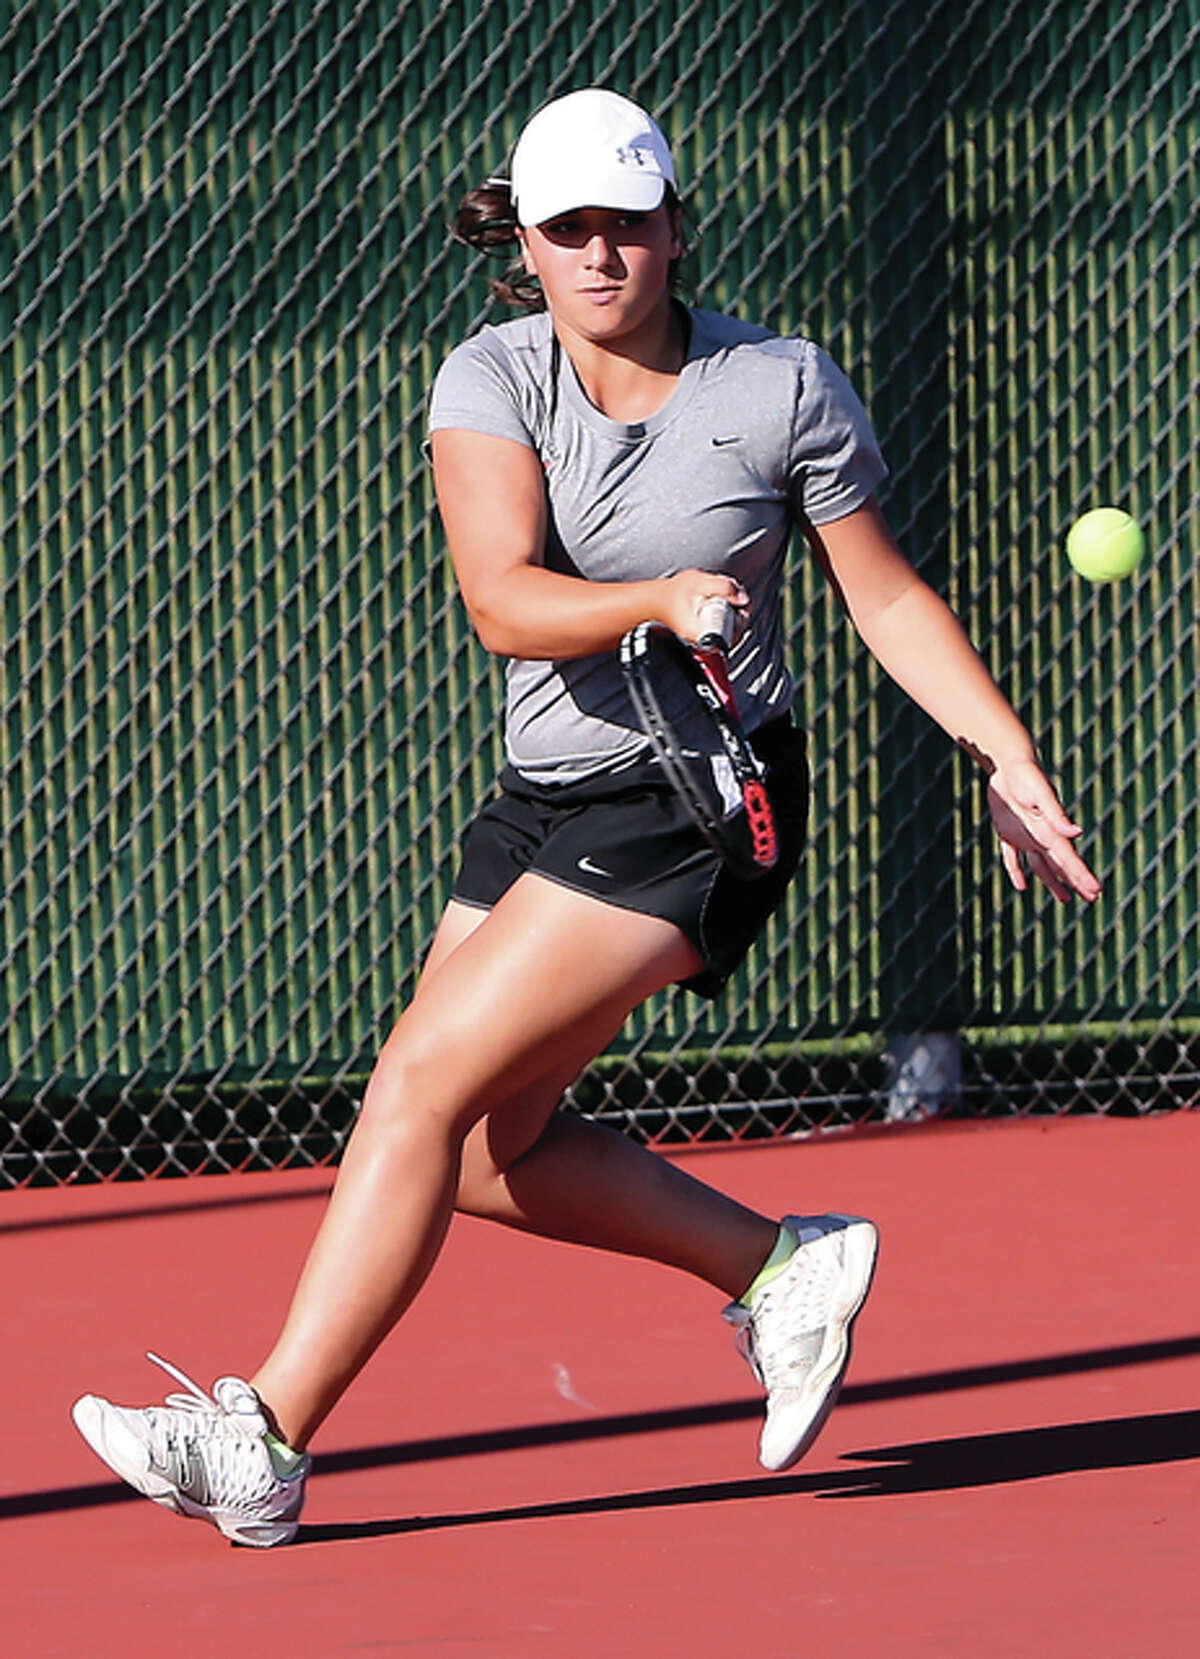 Edwardsville’s Natalie Karibian, shown in a match last season, won the singles championship Saturday at the Belleville East Class 2A Sectional to help the Tigers earn their 20th straight sectional title.